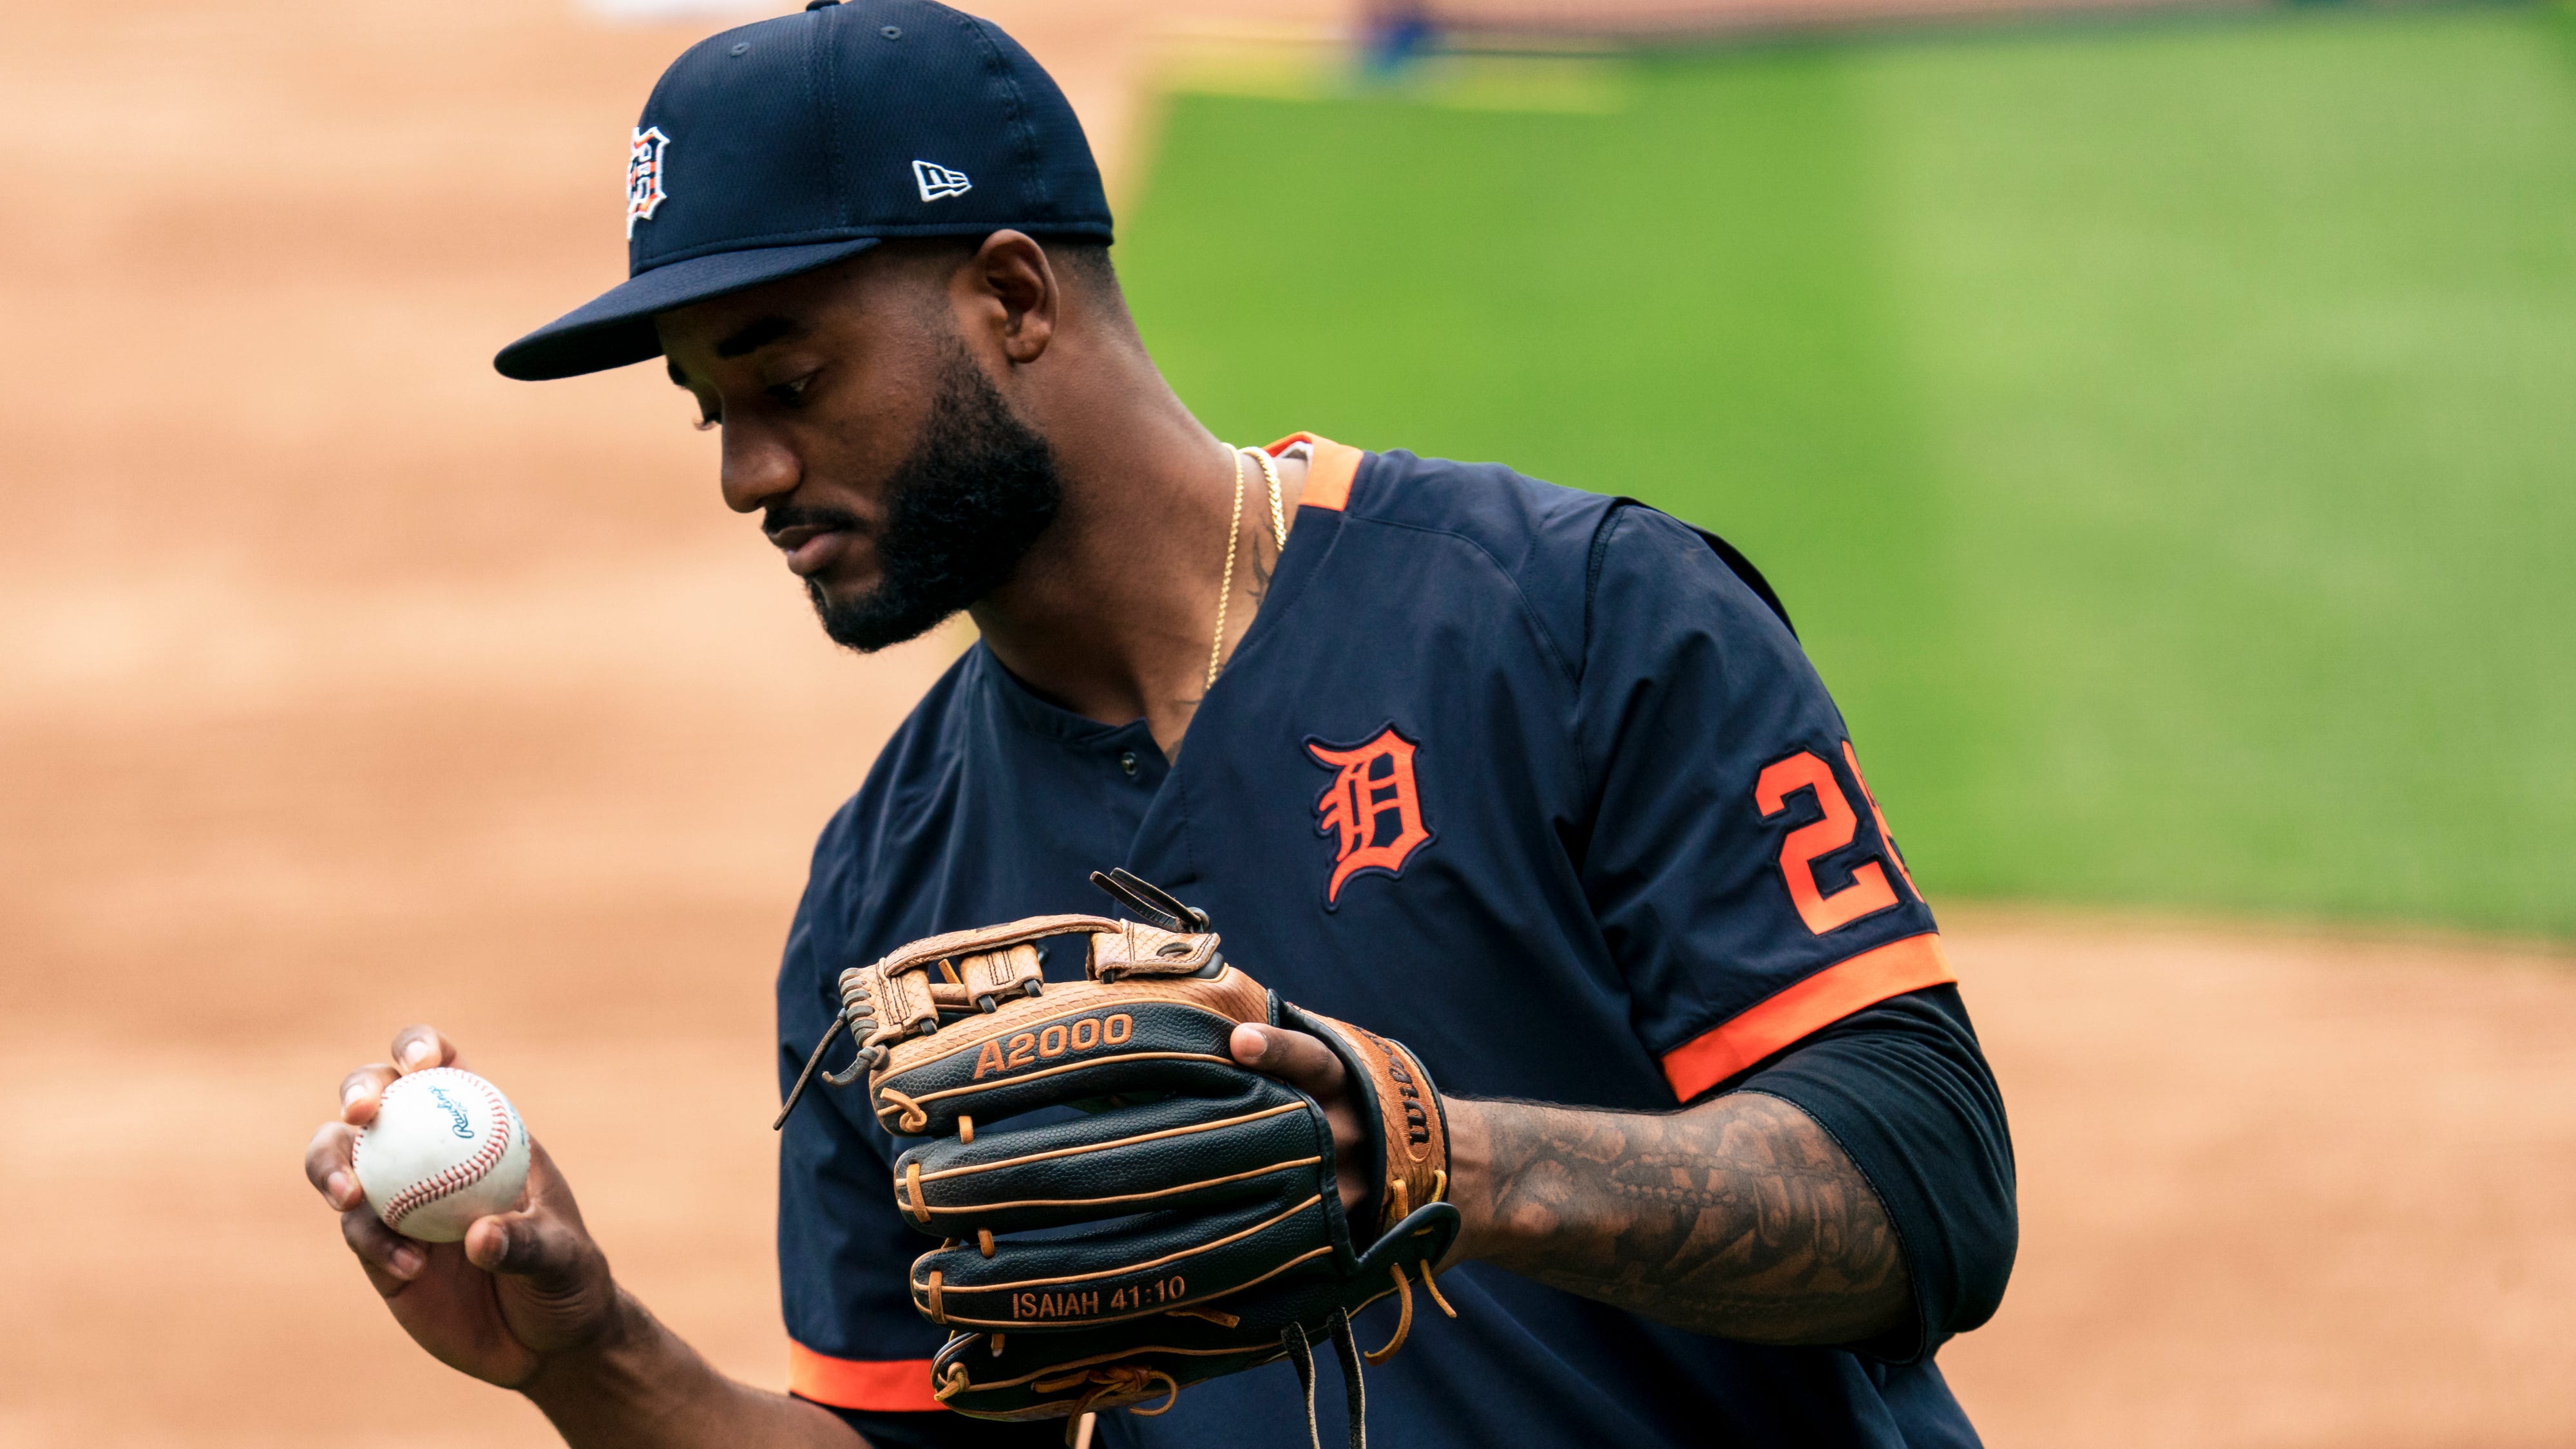 Niko Goodrum #28 of the Detroit Tigers warms up before the game against the Kansas City Royals at Kauffman Stadium on May 21, 2021 in Kansas City, Missouri. (Photo by Kyle Rivas/Getty Images)